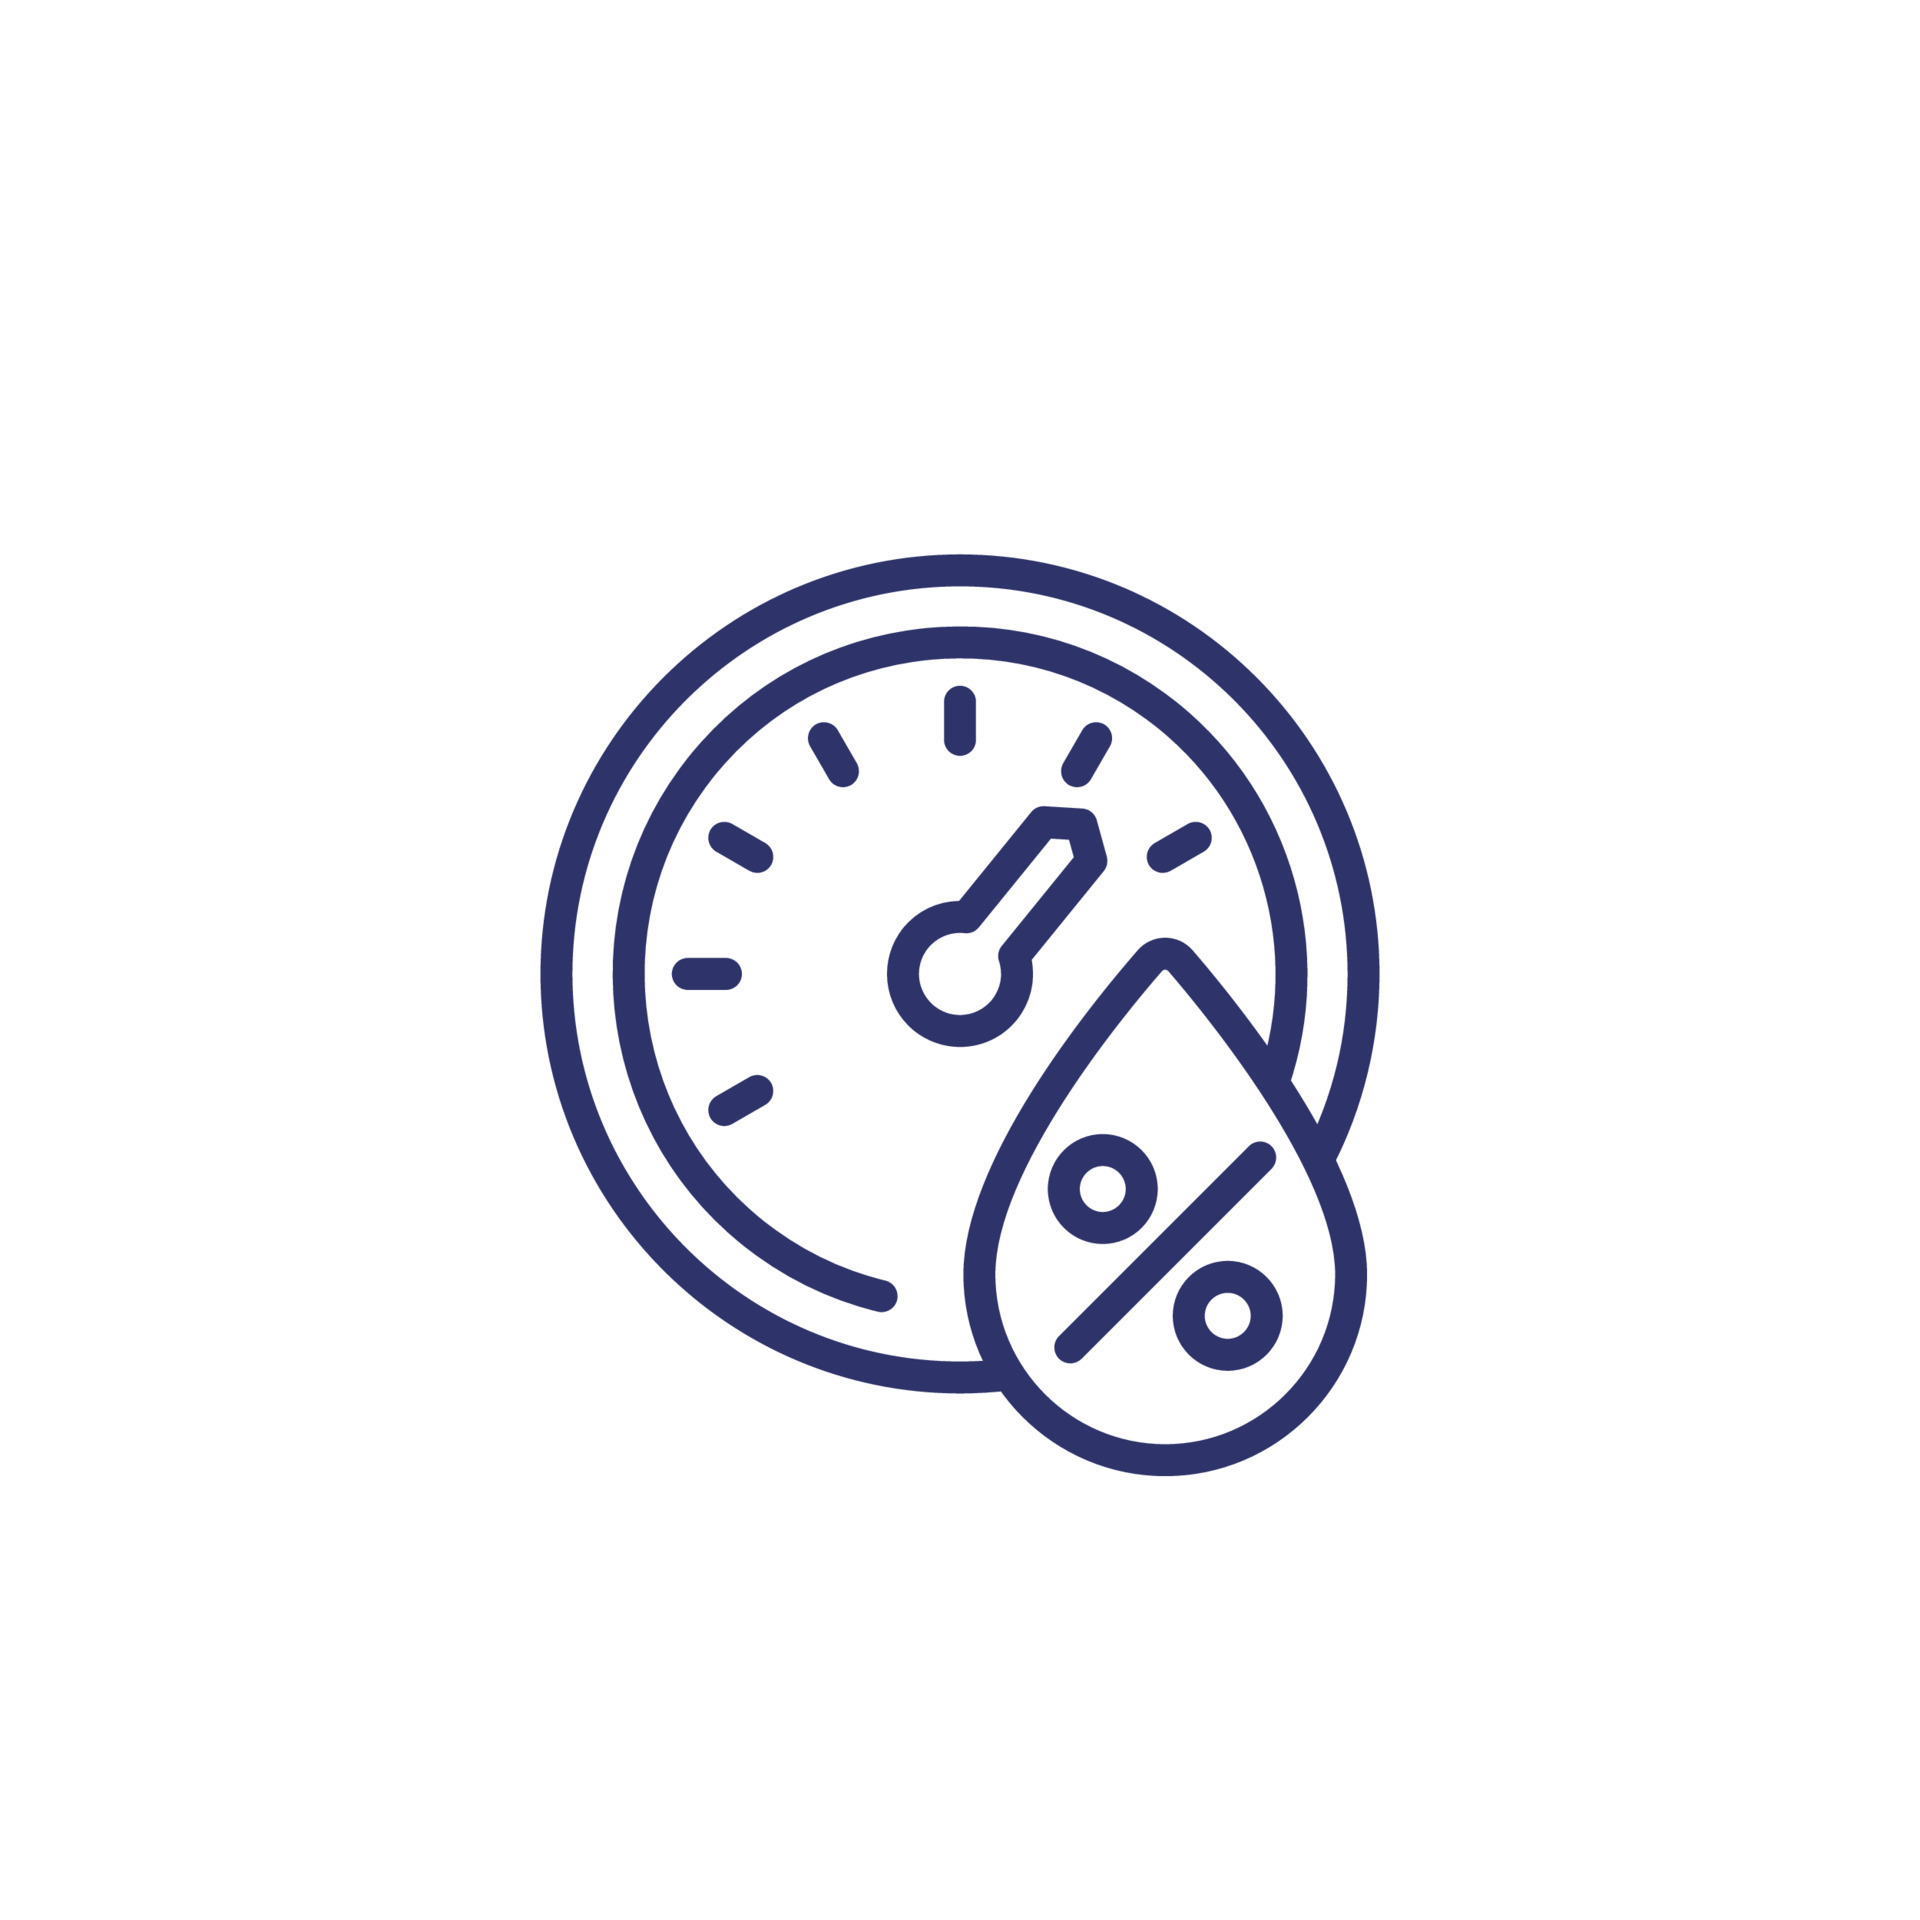 Humidity Control Line Icon Stock Illustration - Download Image Now